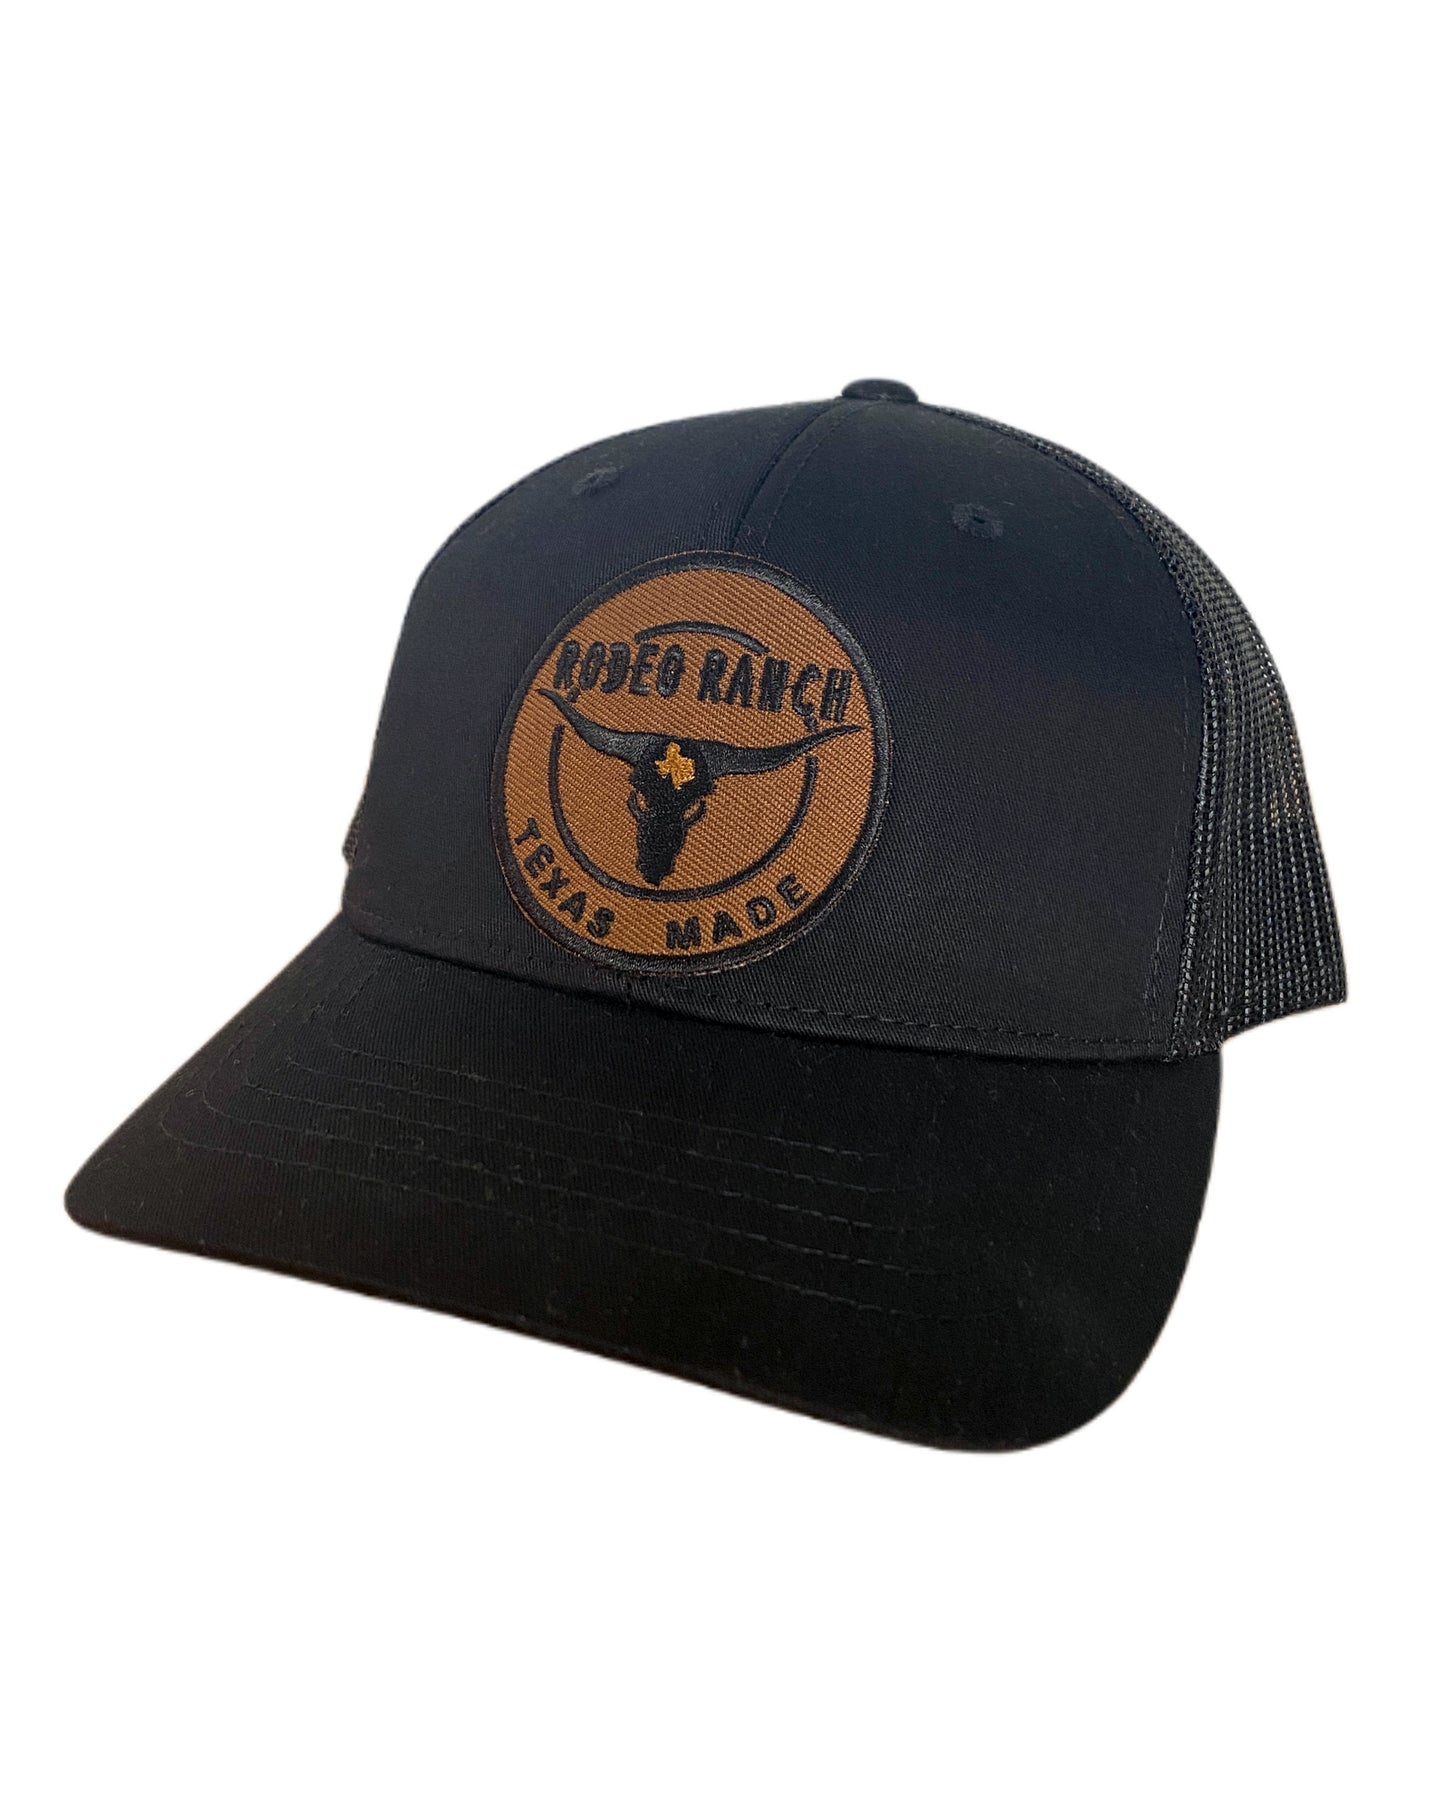 Rodeo Ranch Kids Texas Made Hat - Solid Black